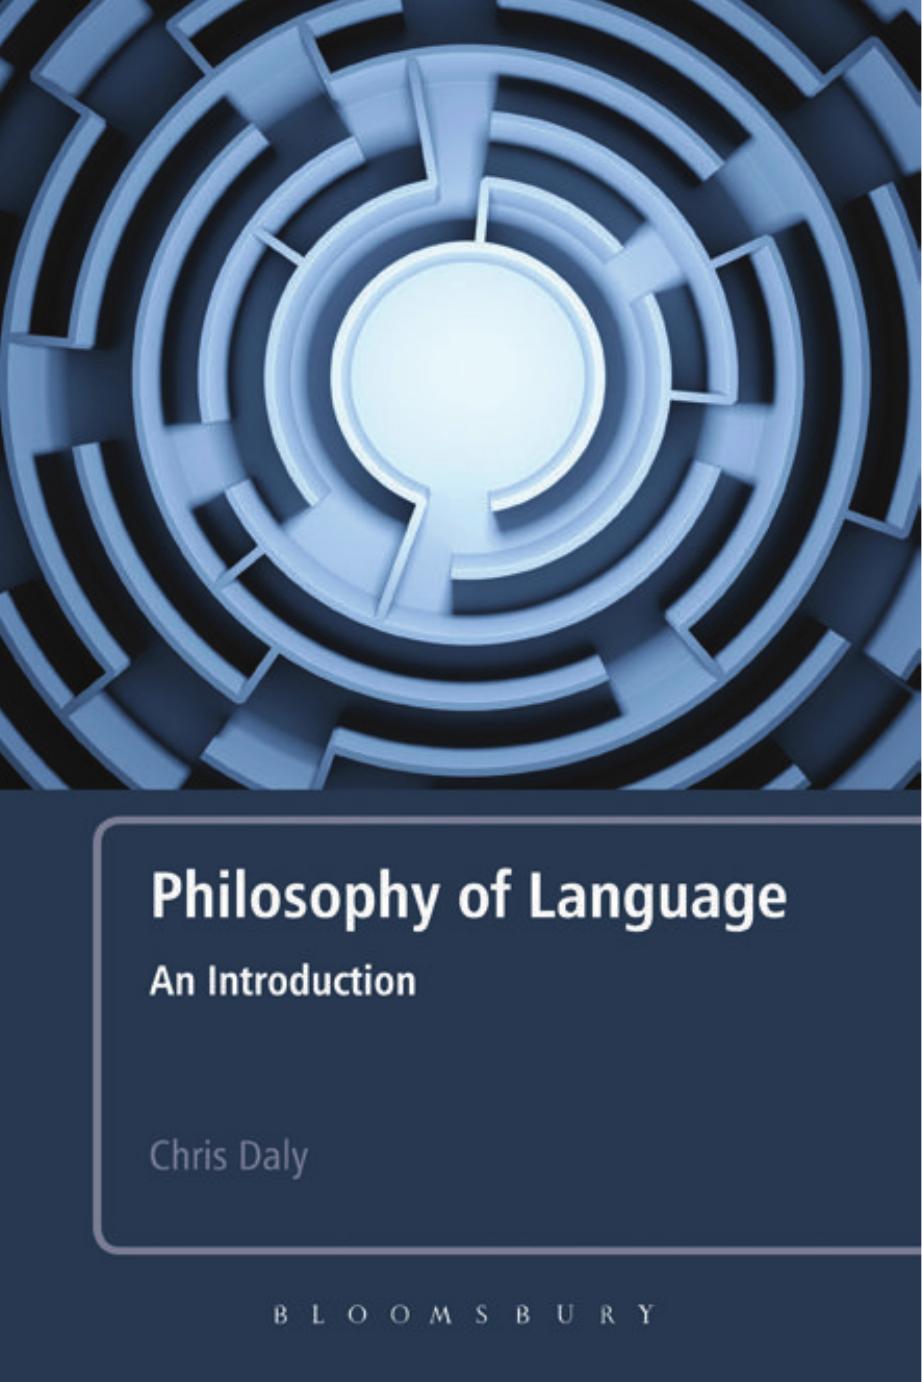 Philosophy of Language: An Introduction